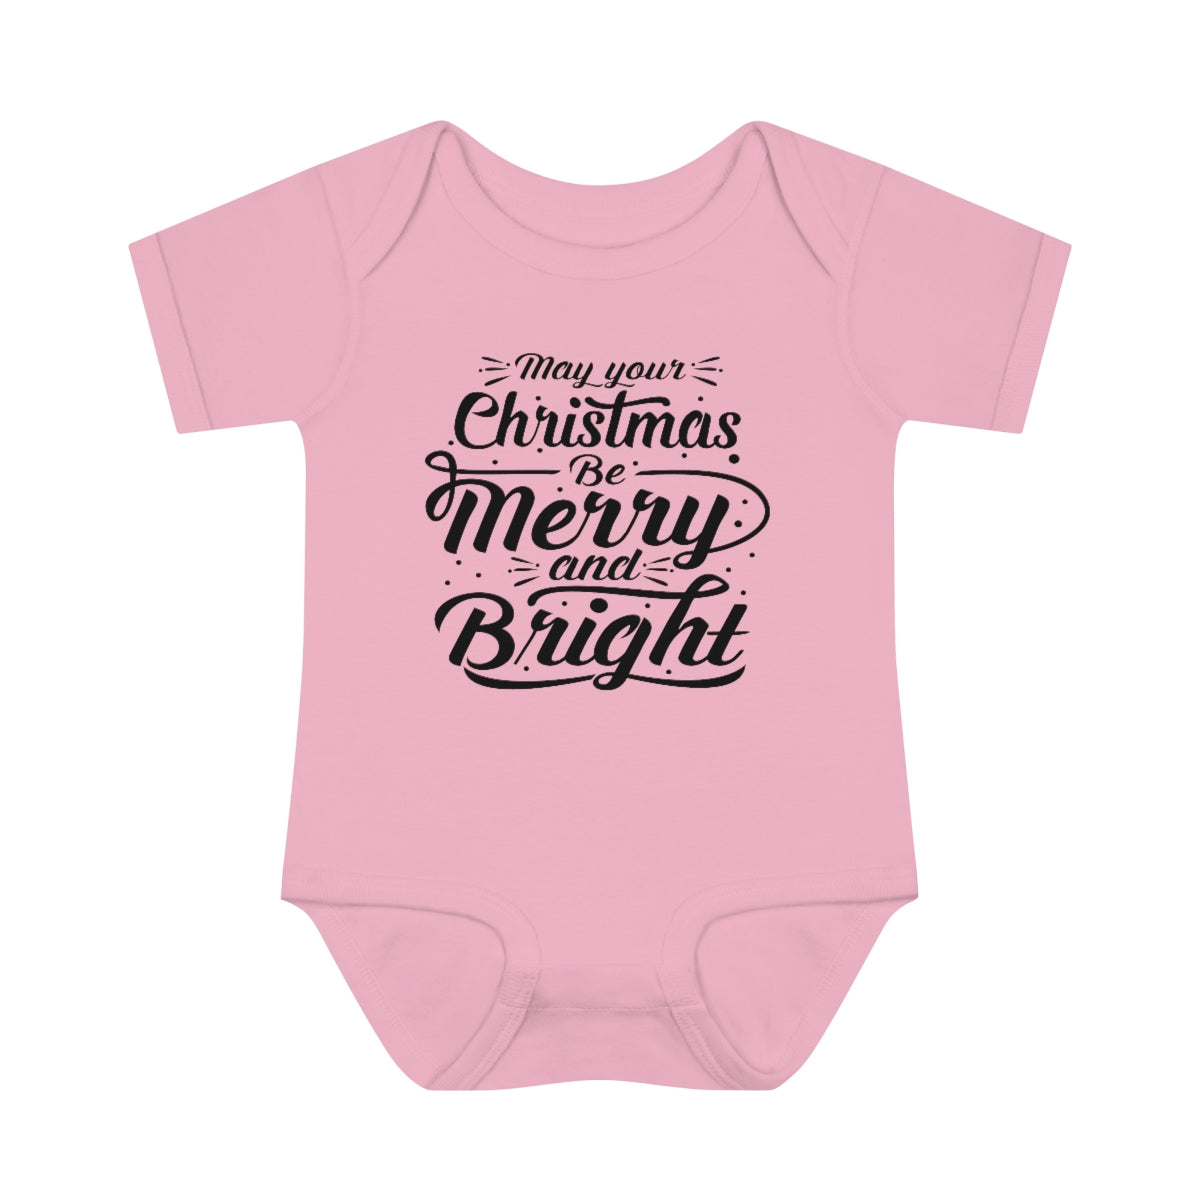 Merry and Bright Baby Bodysuit, Christmas Baby Bodysuit, Merry Christmas, Christmas Baby Bodysuit, Infant Bodysuit, Merry Christmas Baby Bodysuit